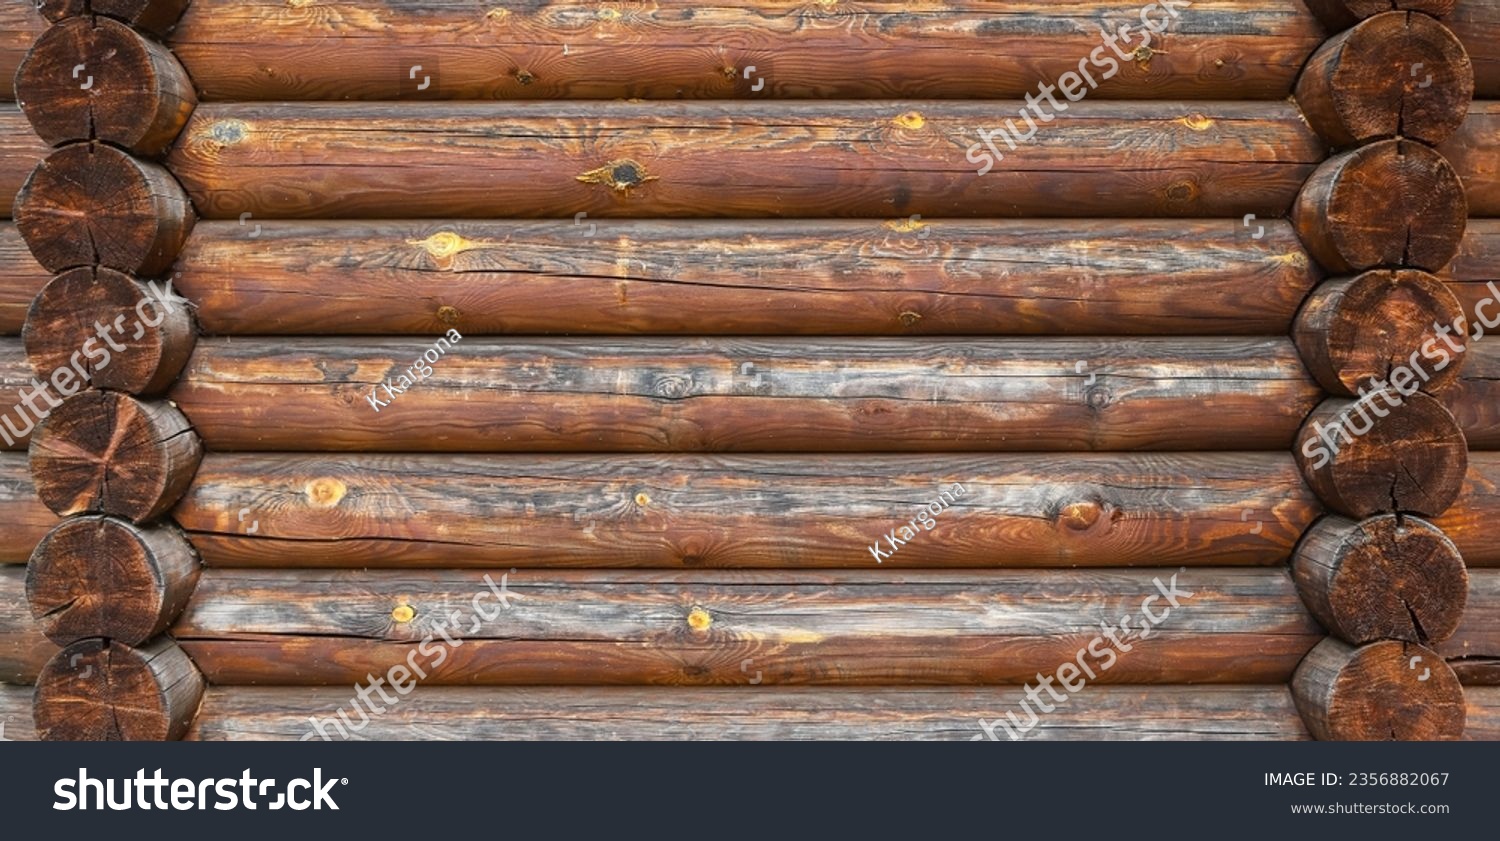 A log wall construction with a swedish cope log profile. Dirty and heavily cracked brown wall of a blockhouse as a natural rural background #2356882067